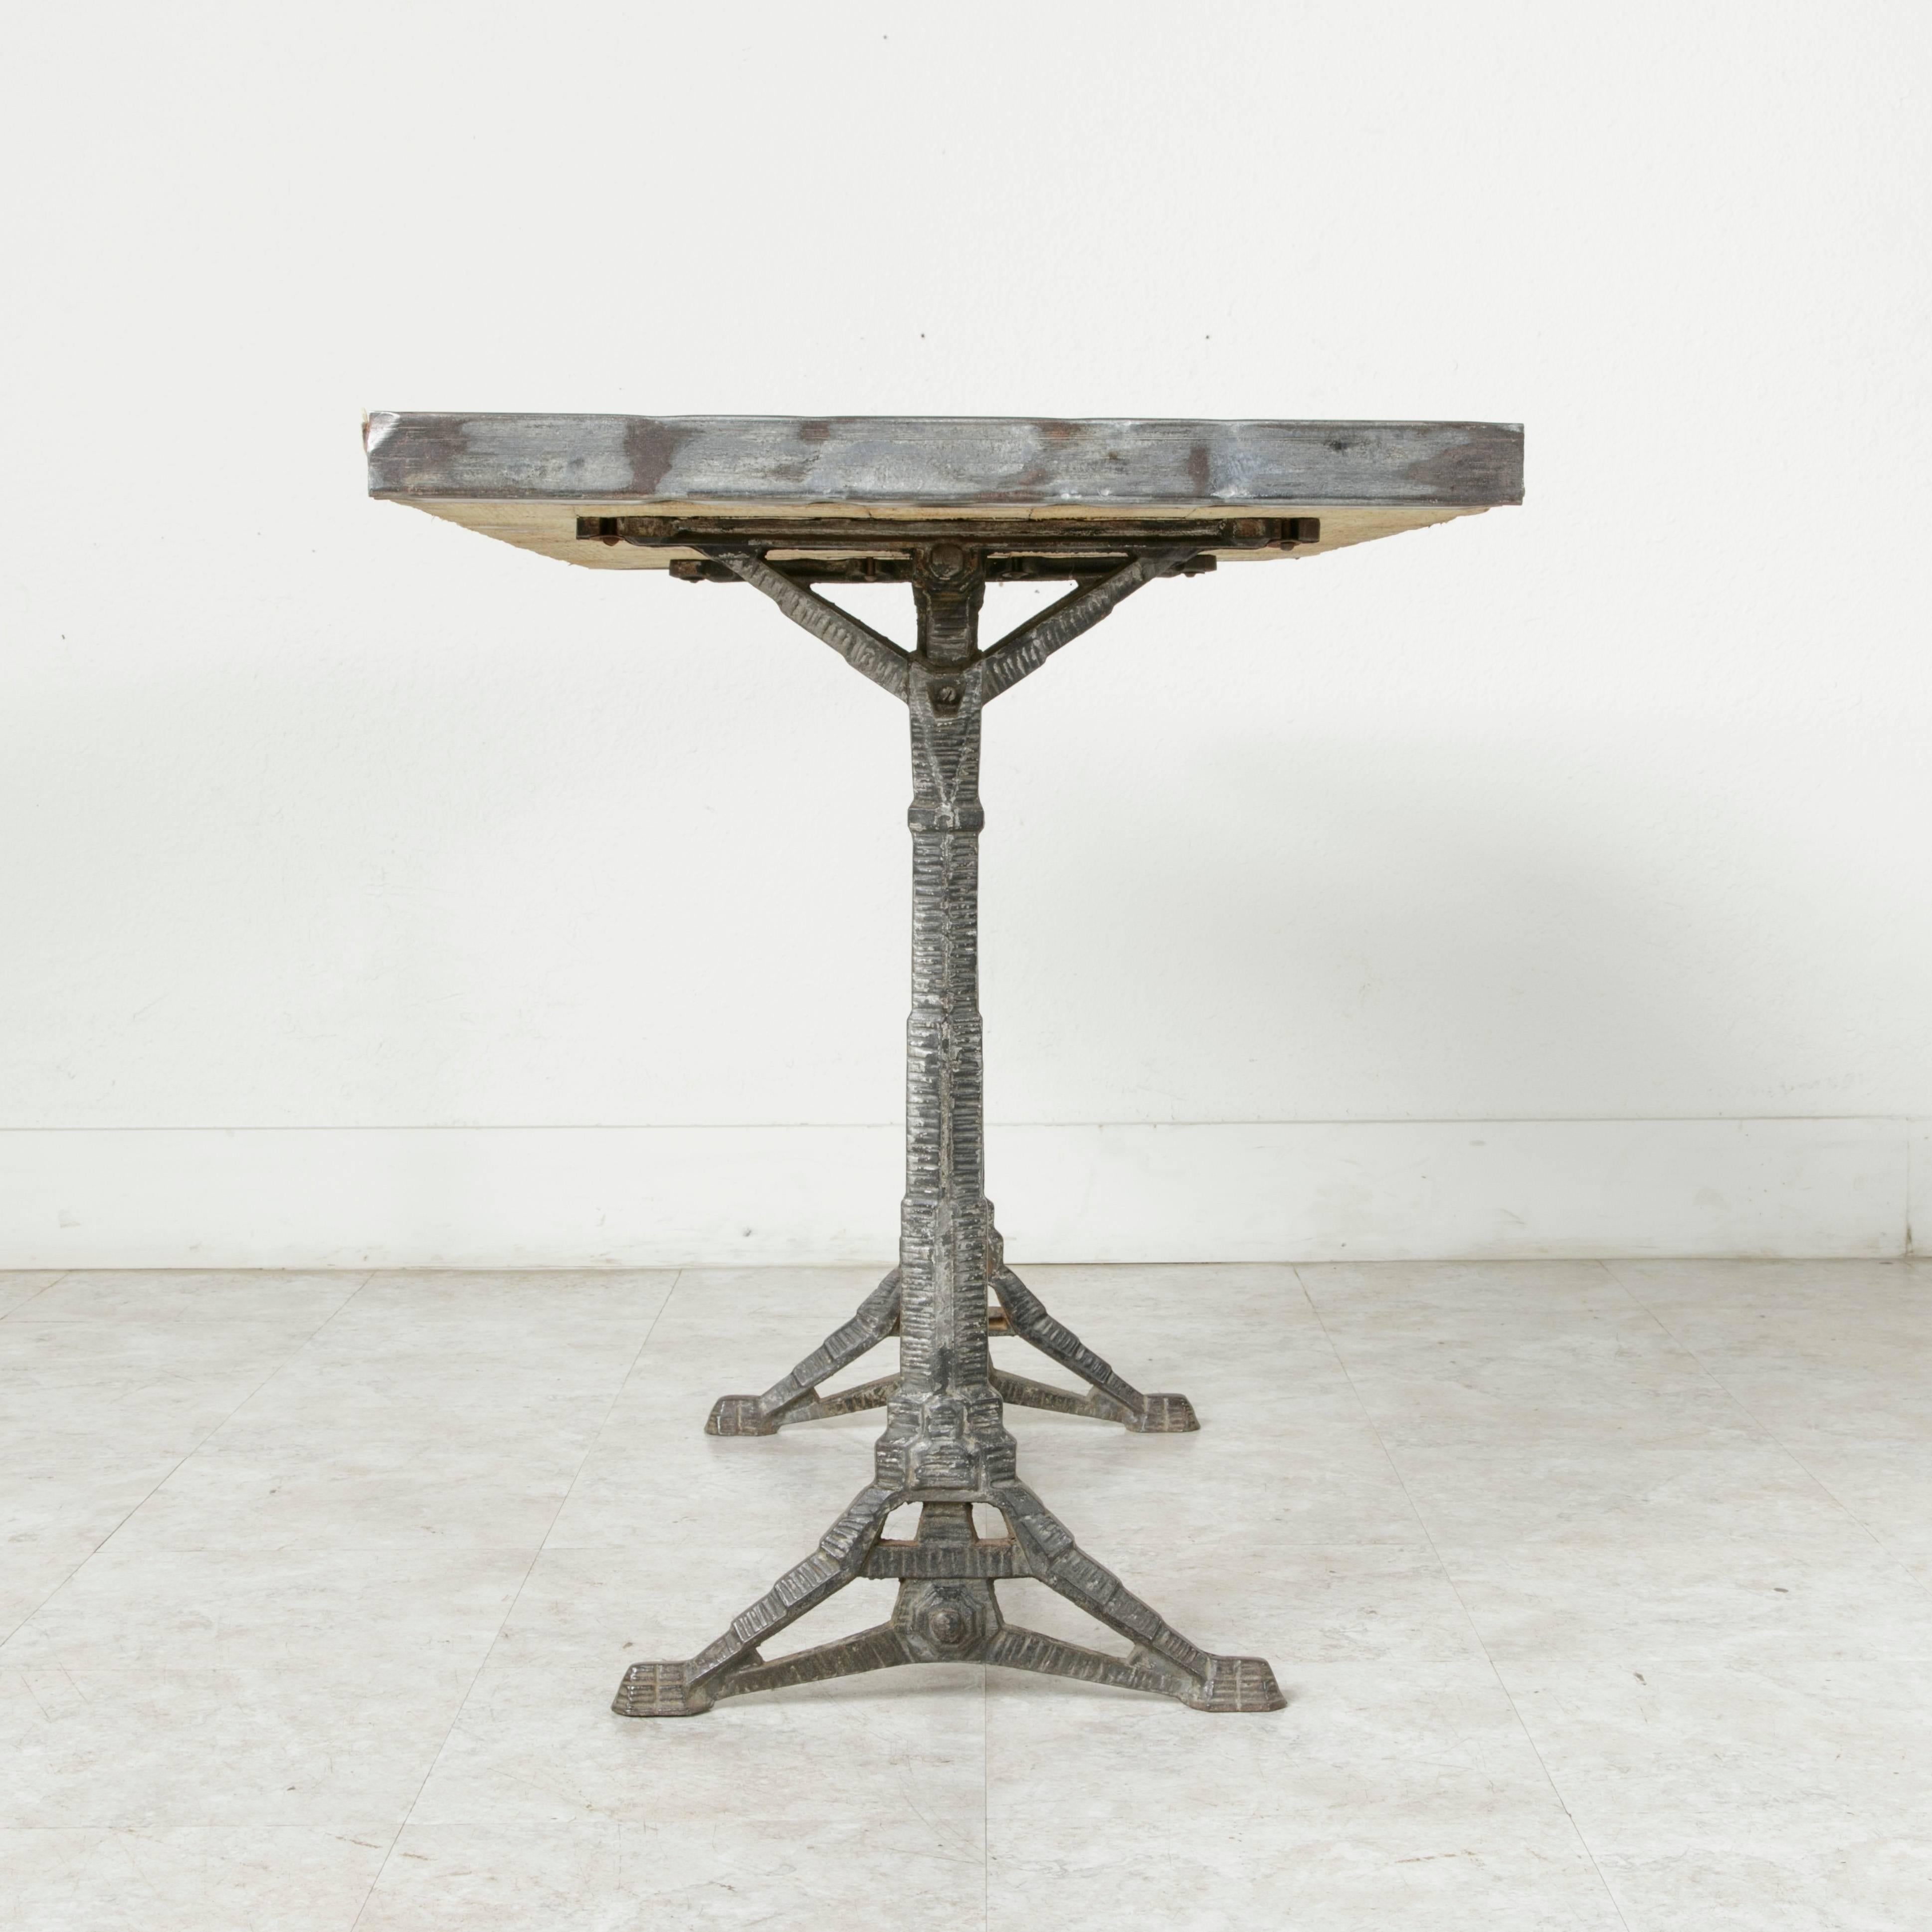 Art Deco Period French Cast Iron Bistro Table, Cafe Table, with Rustic Oak Top 1